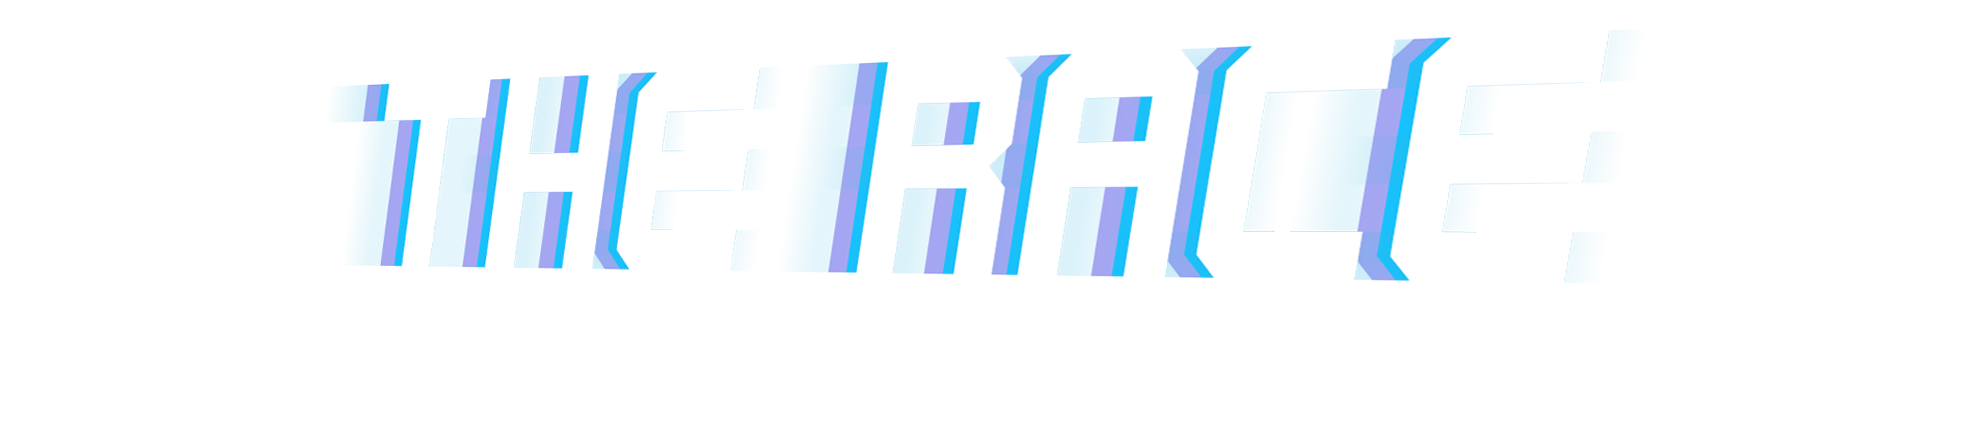 The Race: A Track of Lies!